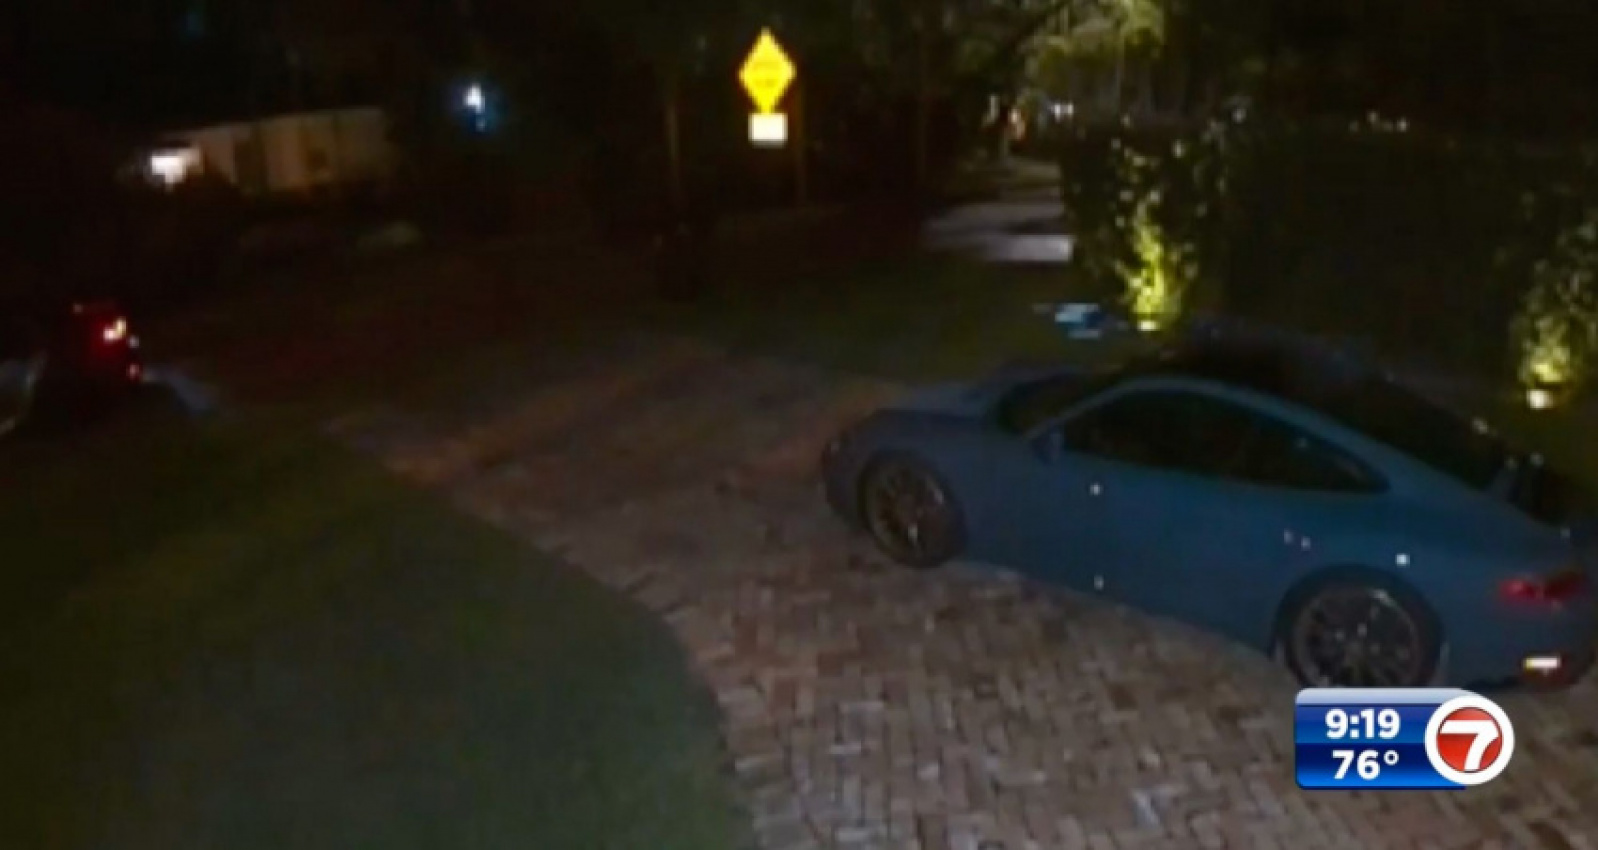 autos, cars, american, asian, celebrity, classic, client, europe, exotic, features, handpicked, italian, luxury, modern classic, muscle, news, newsletter, off-road, racing, sports, trucks, criminals become bolder during luxury car break-in spree in south miami community